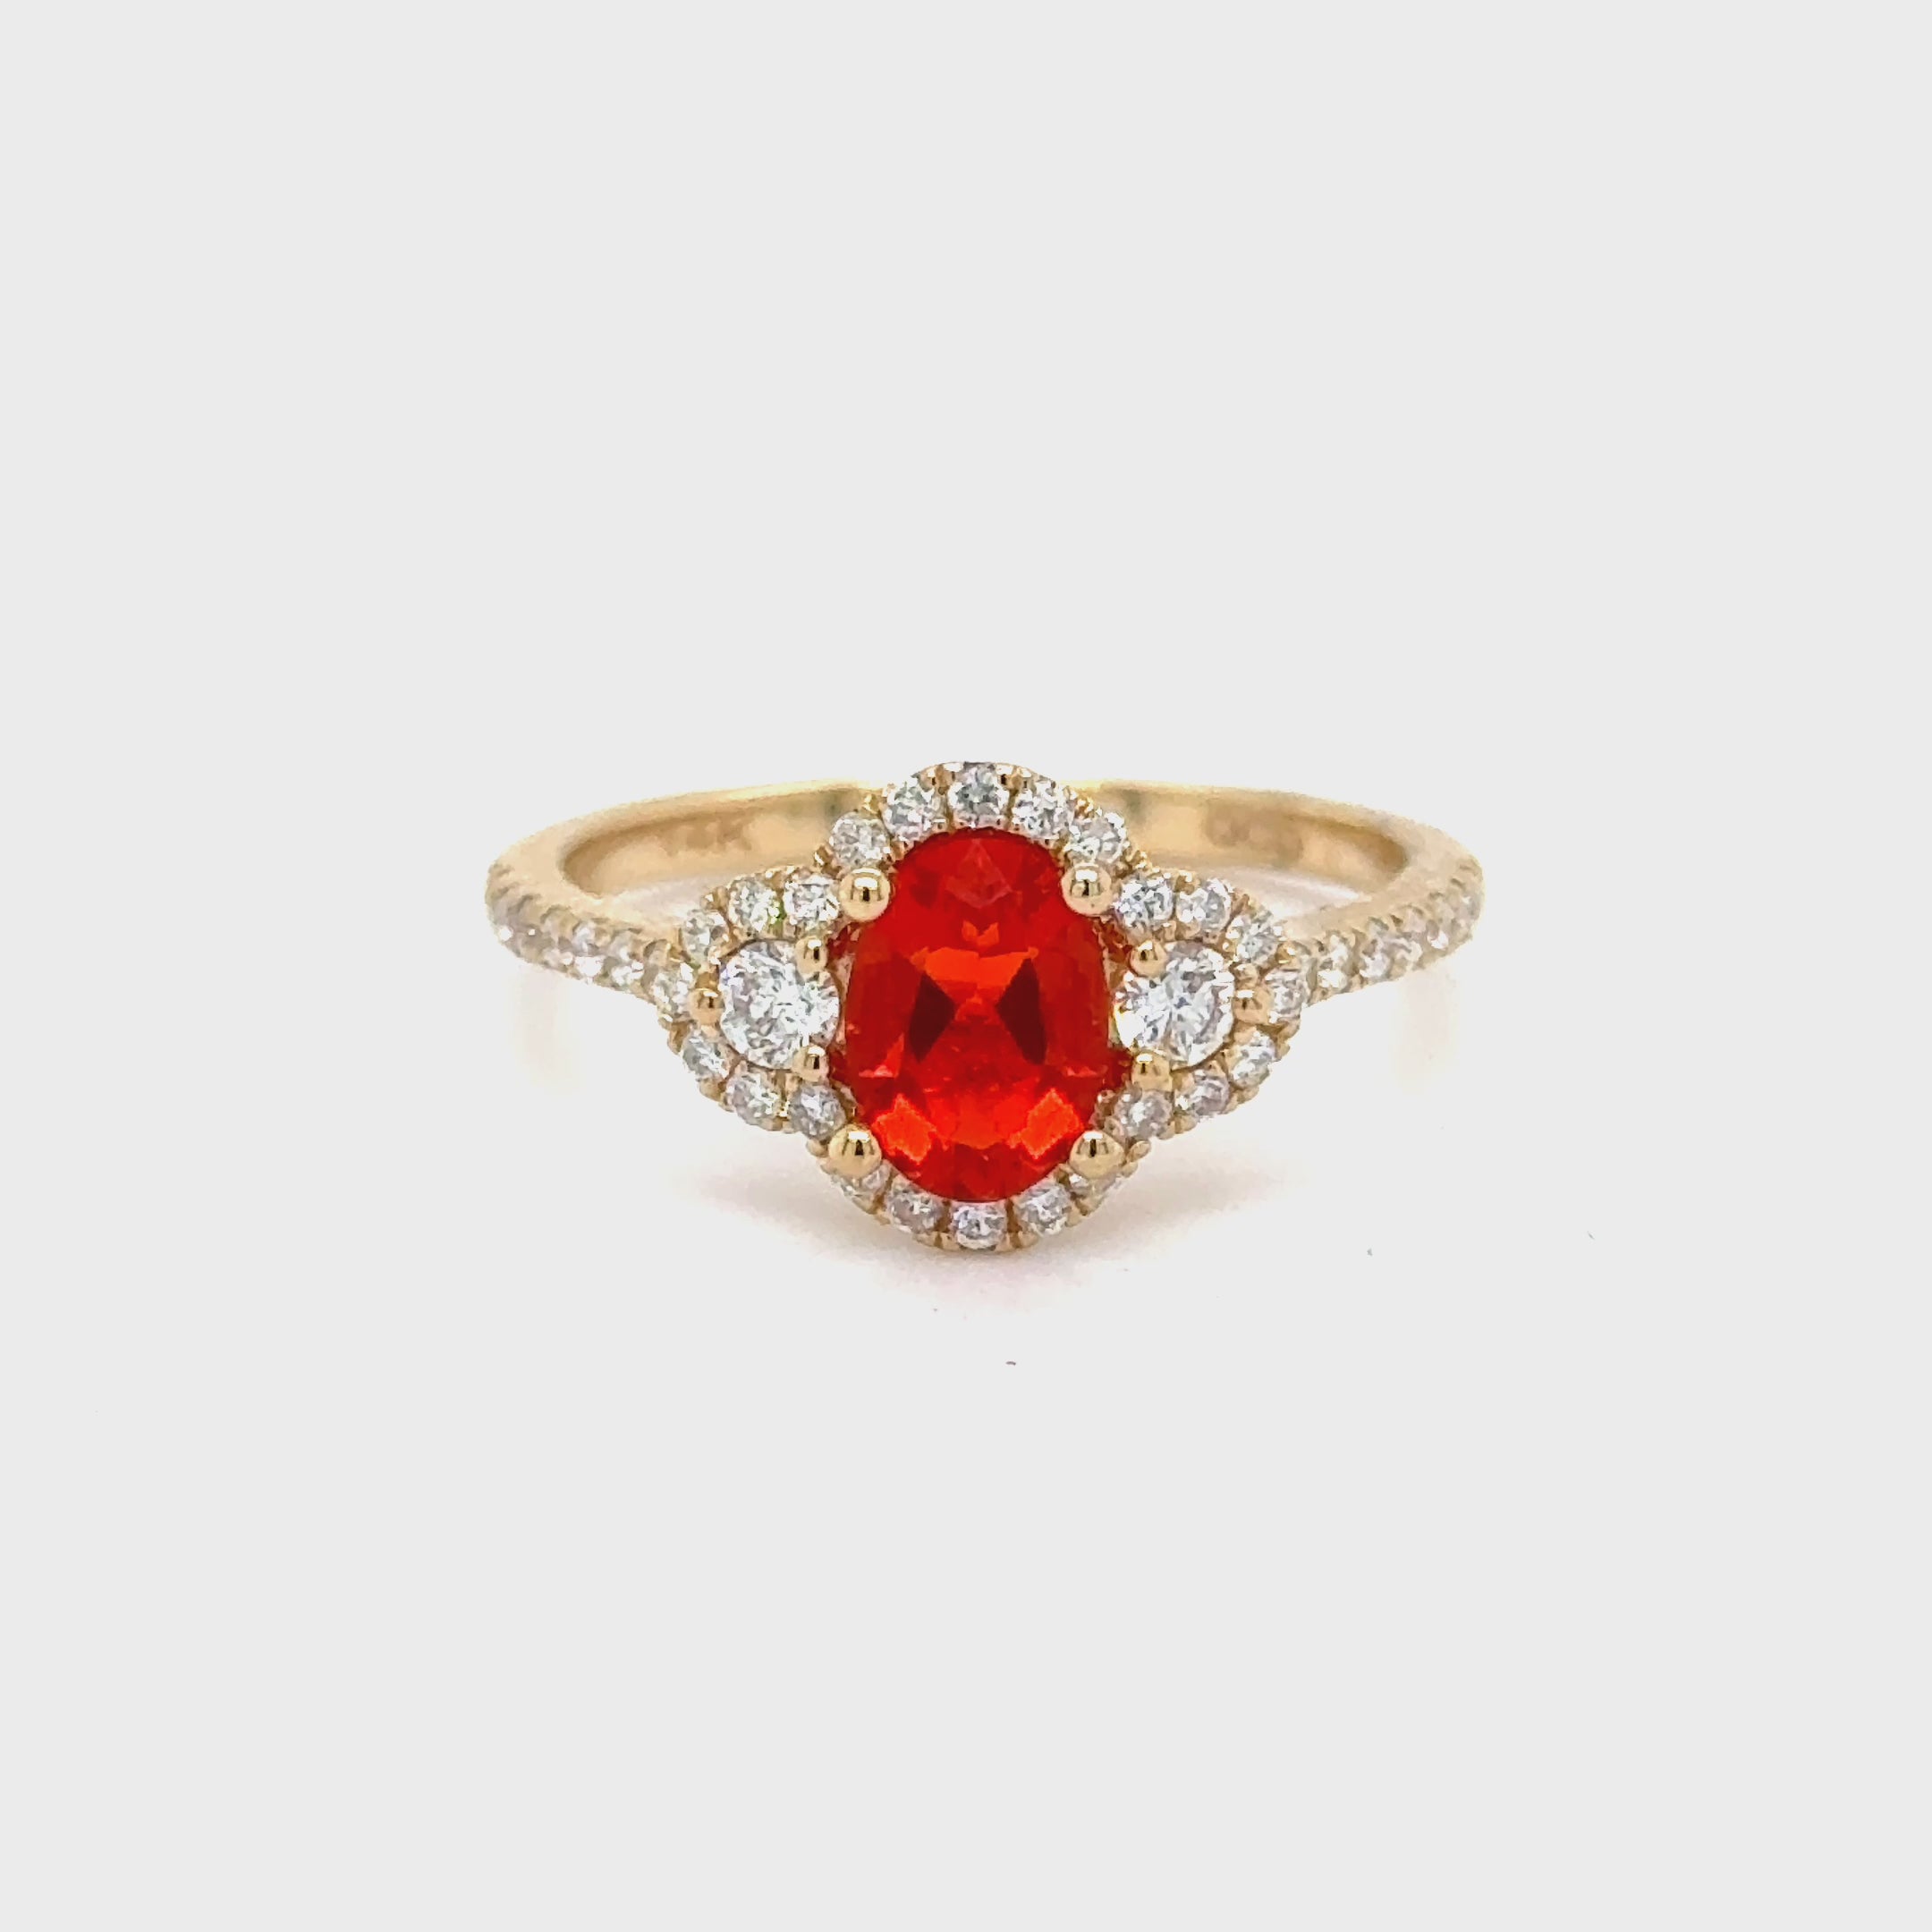 Mexican Fire Opal Ring in 14k Yellow Gold With Accent Diamonds at Regard Jewelry in Austin, Texas